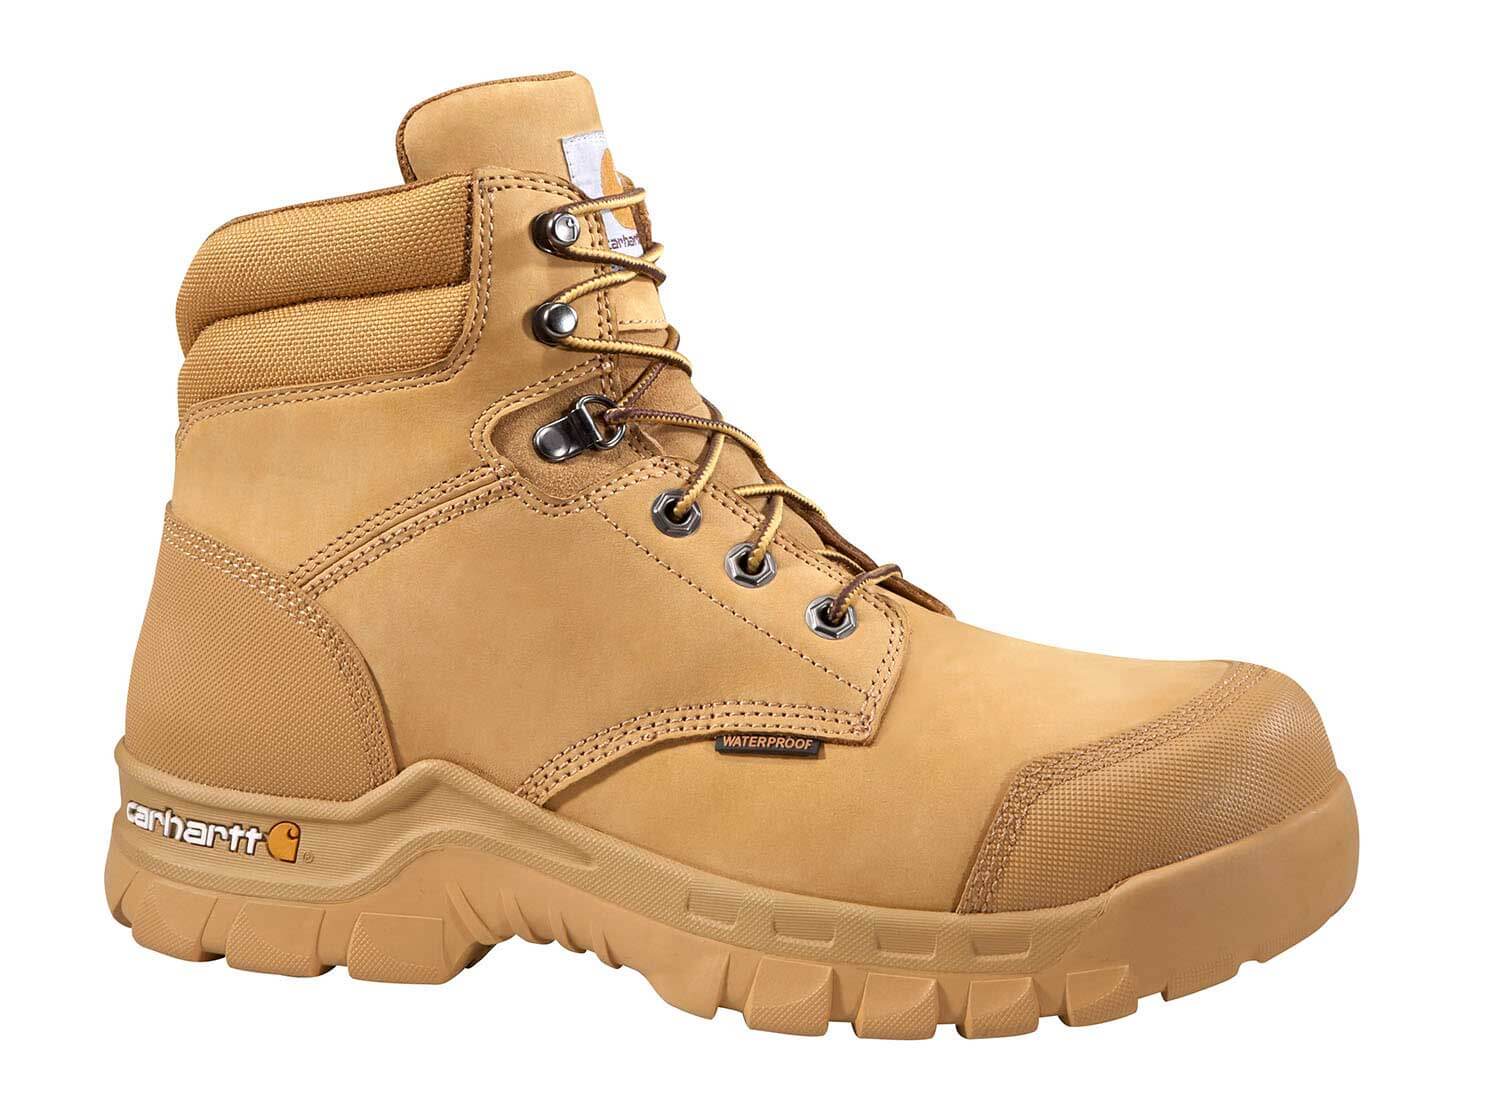 Carhartt - CMF6056 - Men's Rugged Flex Wheat Leather Waterproof Soft Toe 6 Lace-up Work Boot